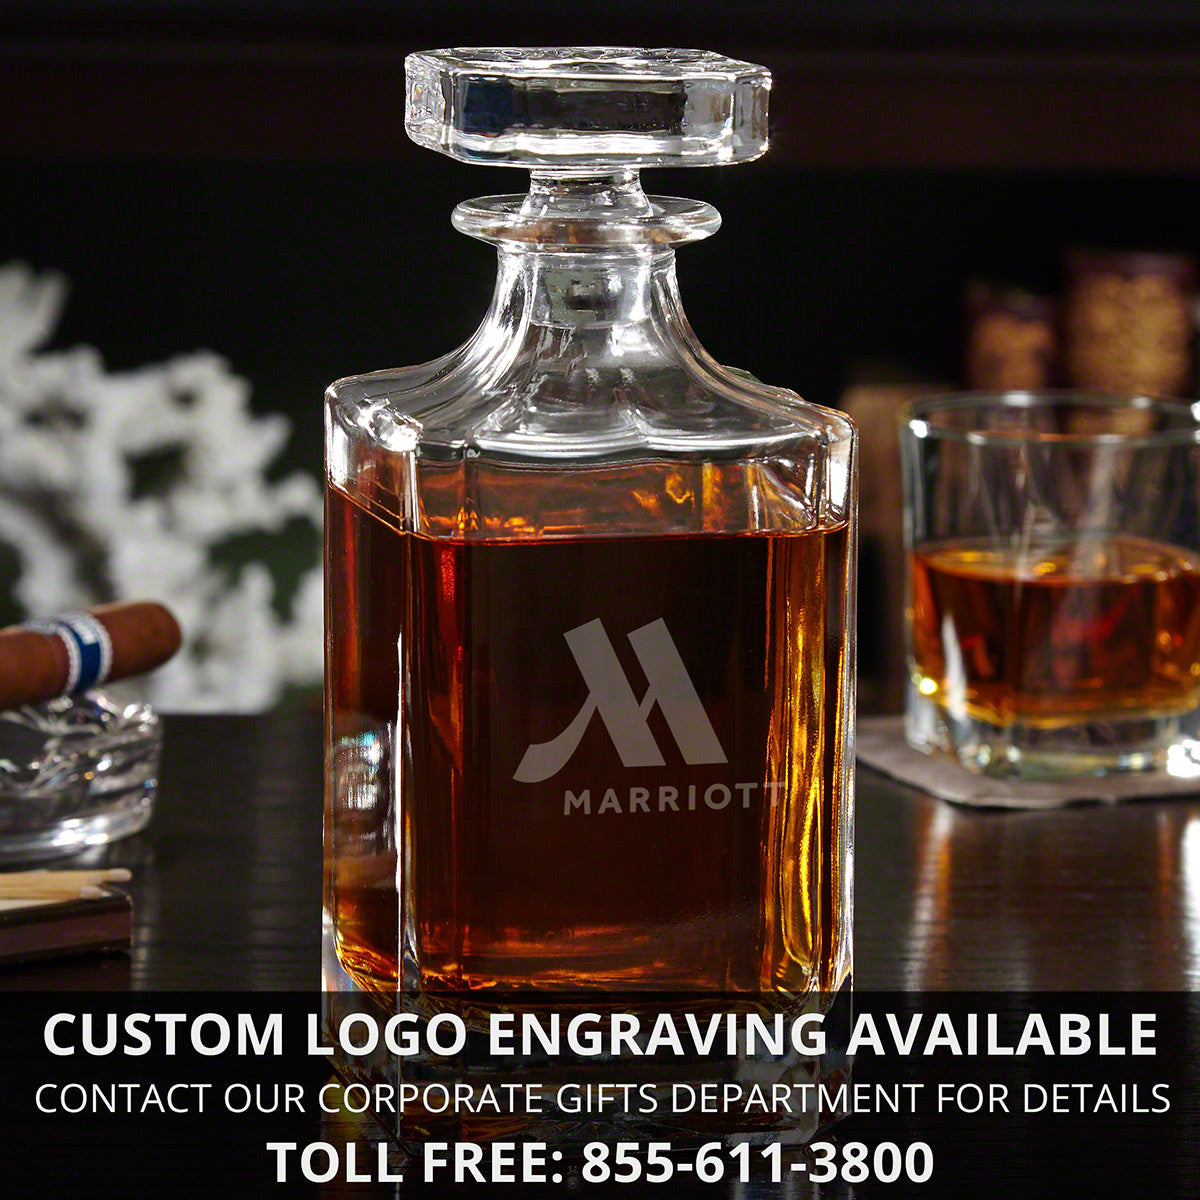 Personalized Groomsmen Gift Ideas Set of 5 Carson Decanters - Moore Design